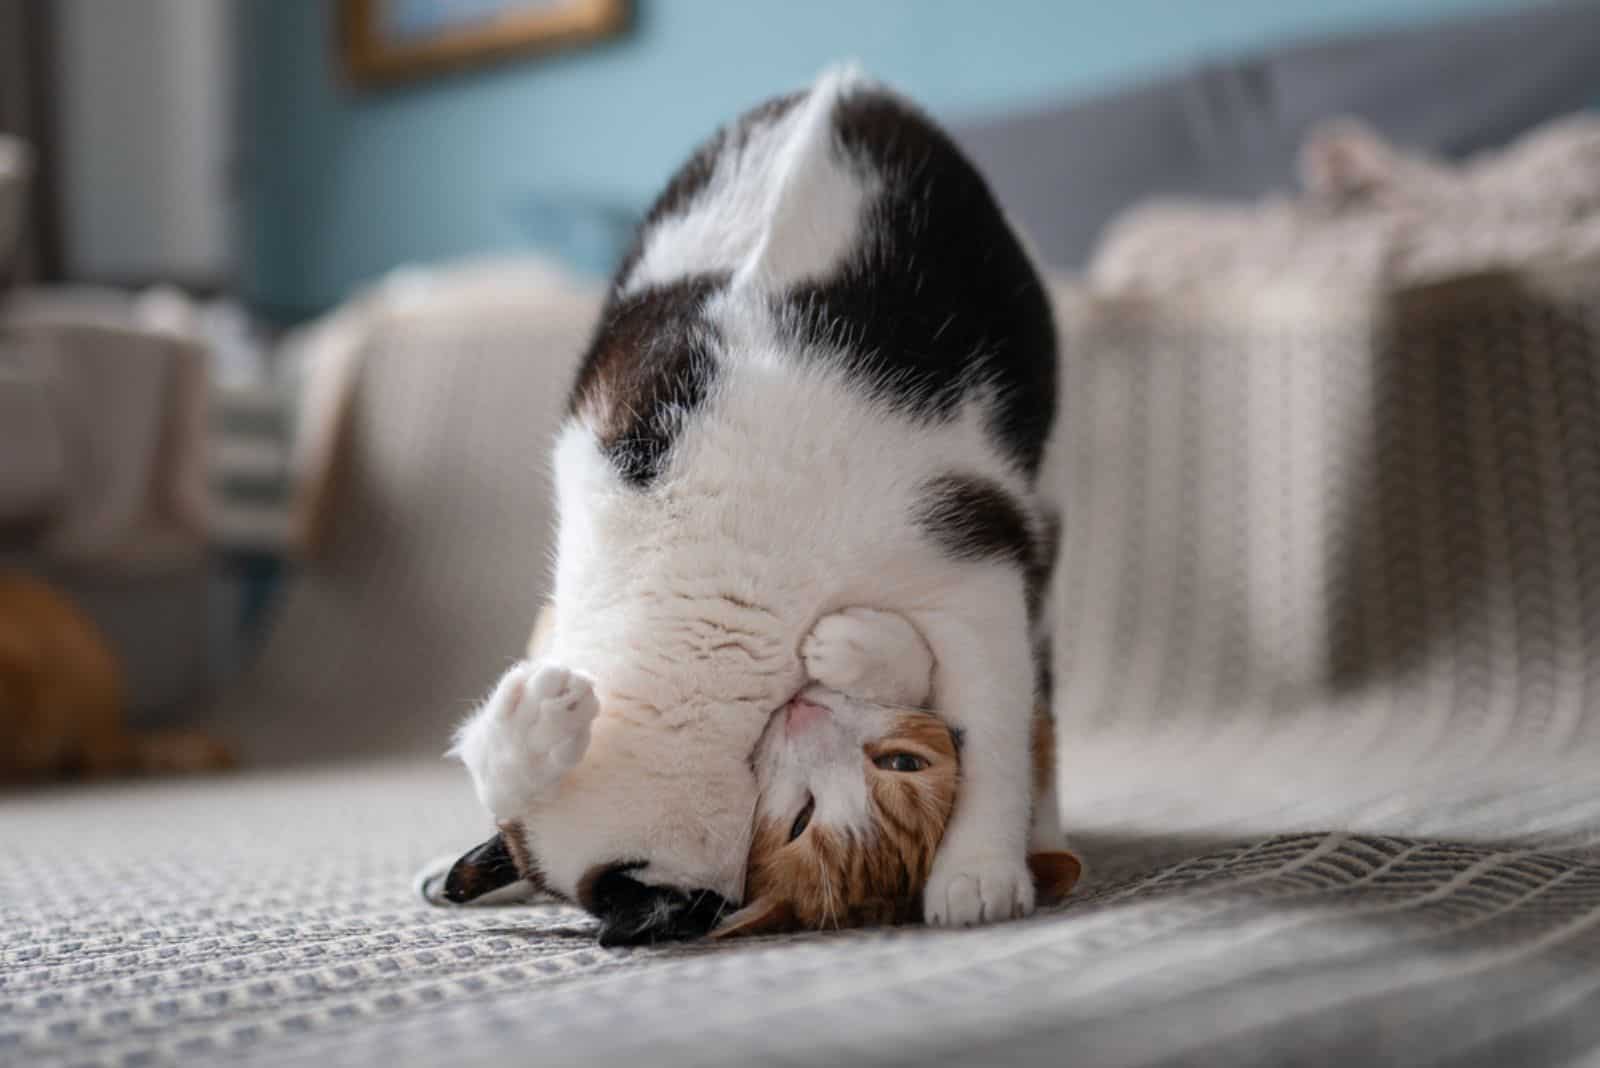 black and white cat and white and brown cat bite each other's necks on a carpet